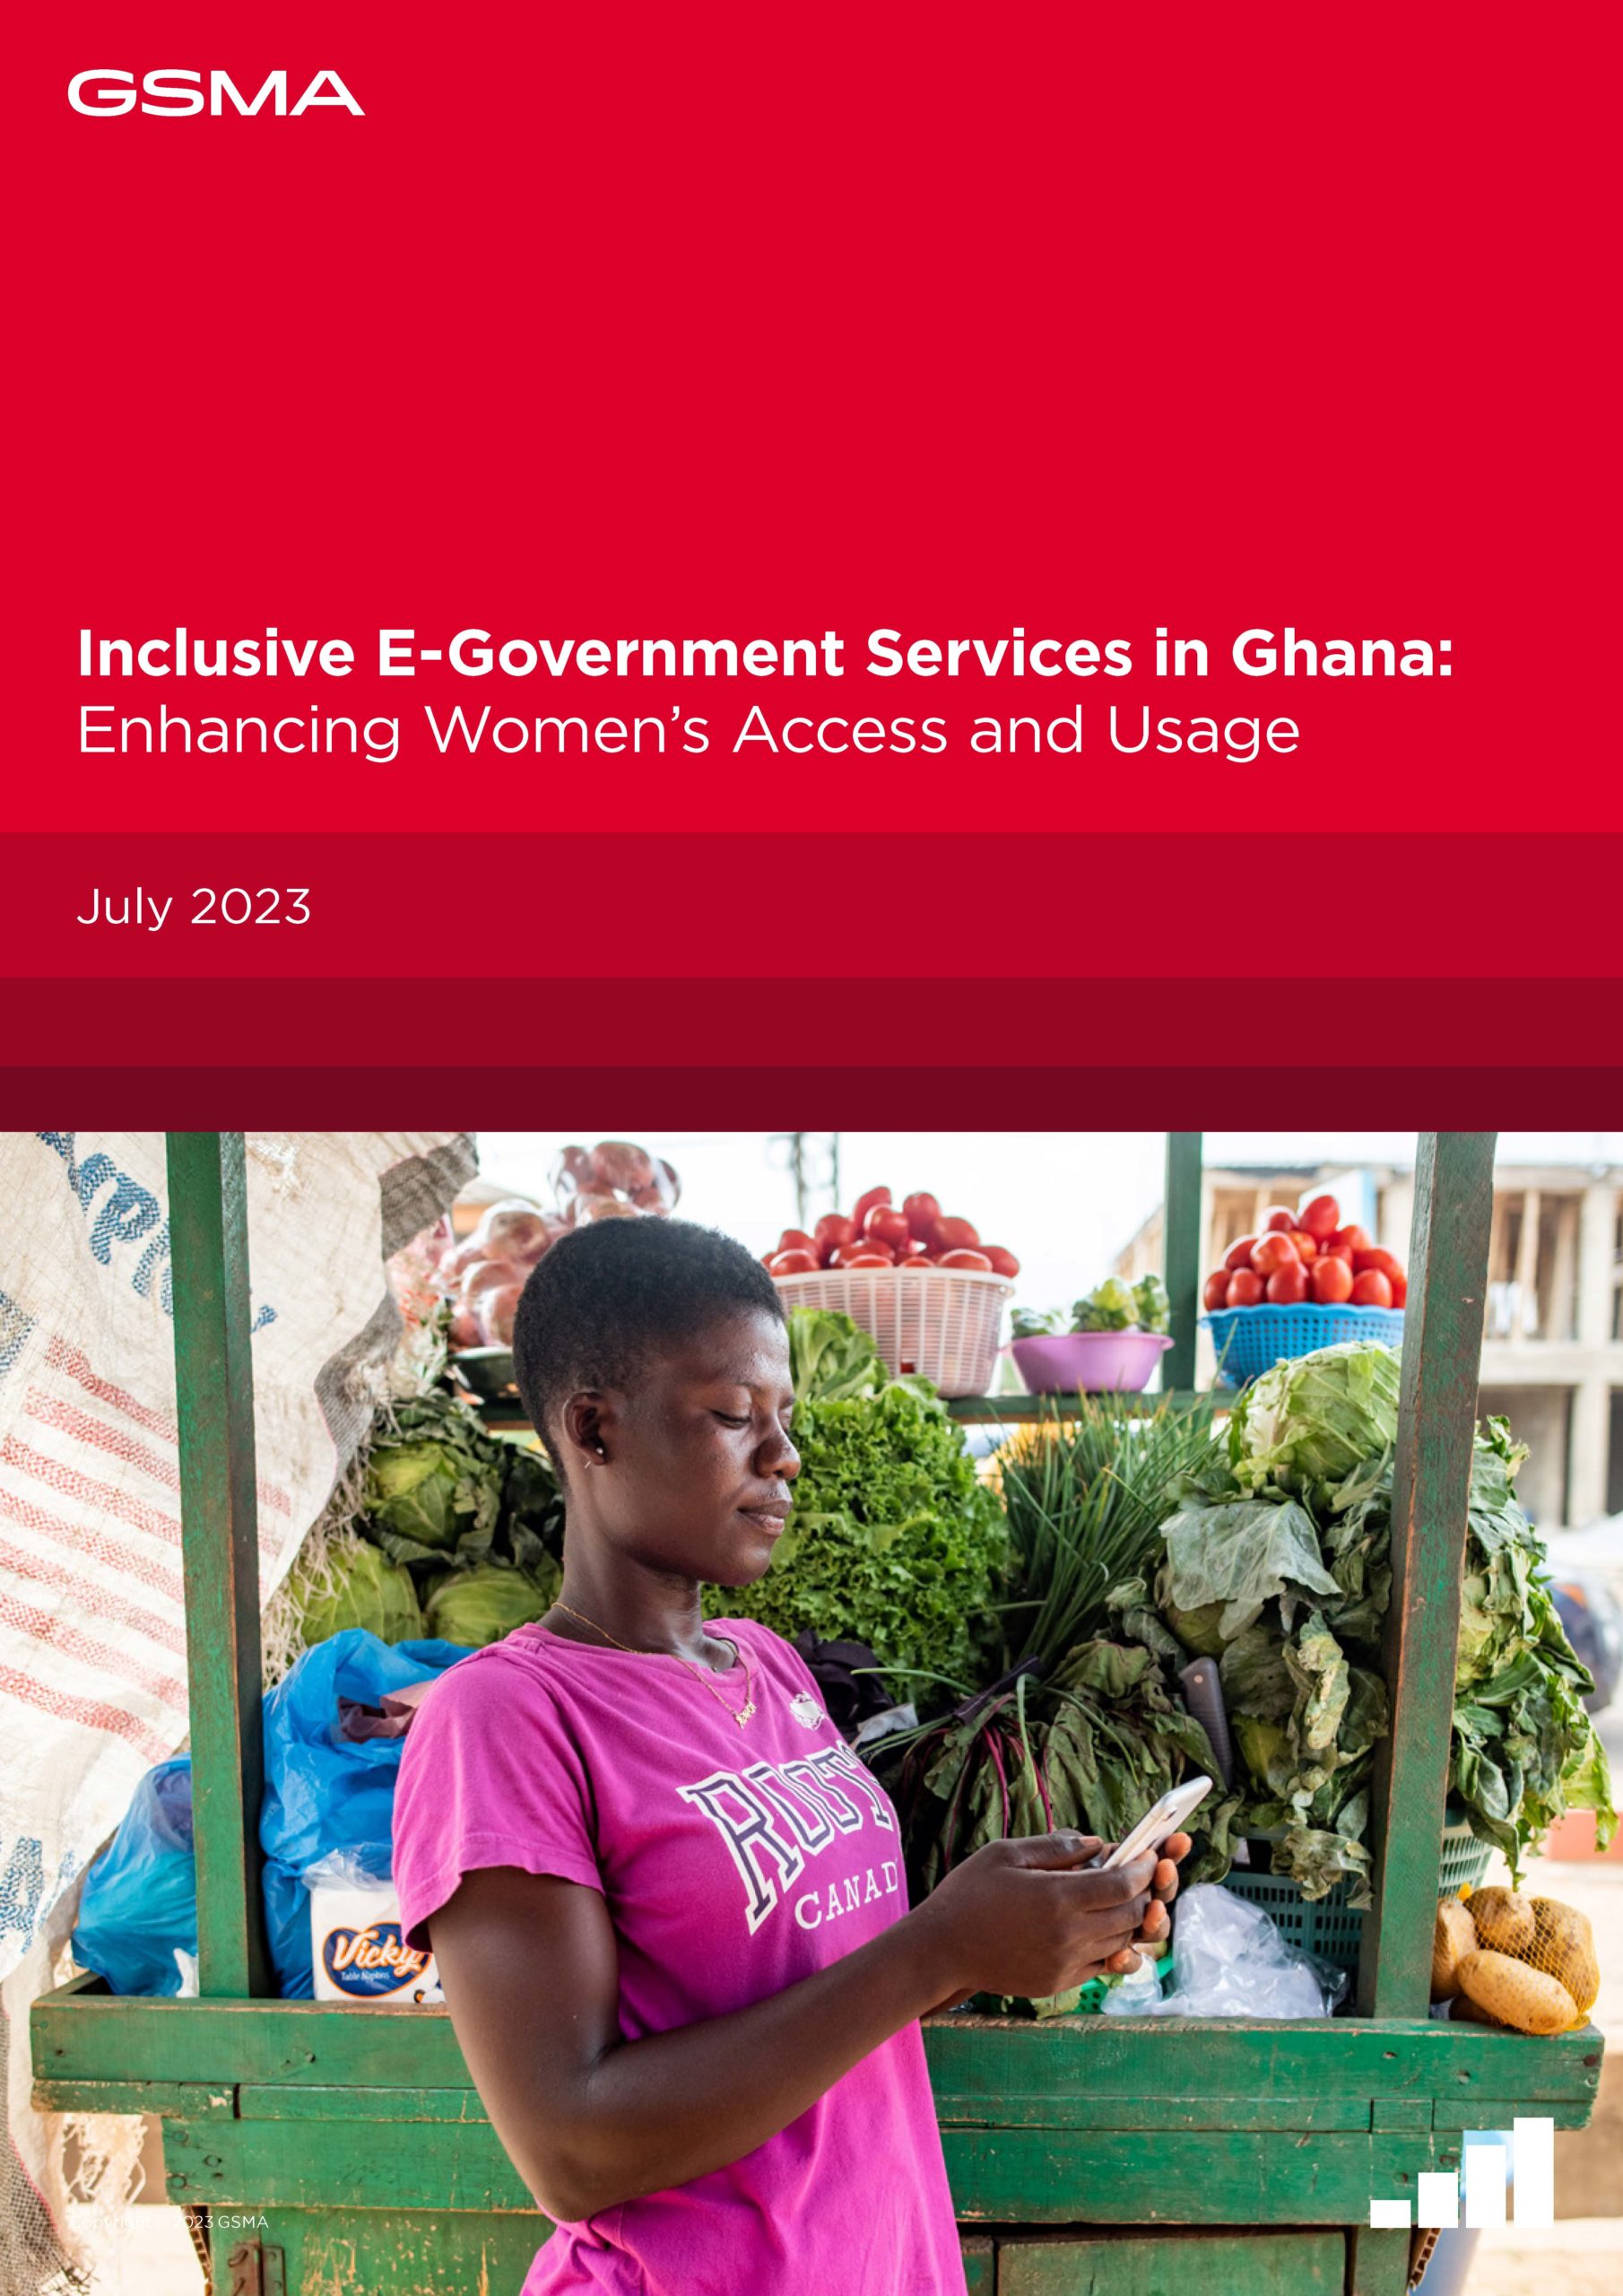 https://www.gsma.com/mobilefordevelopment/wp-content/uploads/2023/07/FINAL_GSMA_Inclusive-E-Government-Services-in-Ghana-Enhancing-Womens-Access_56pp_v5_Page_01-scaled.jpg